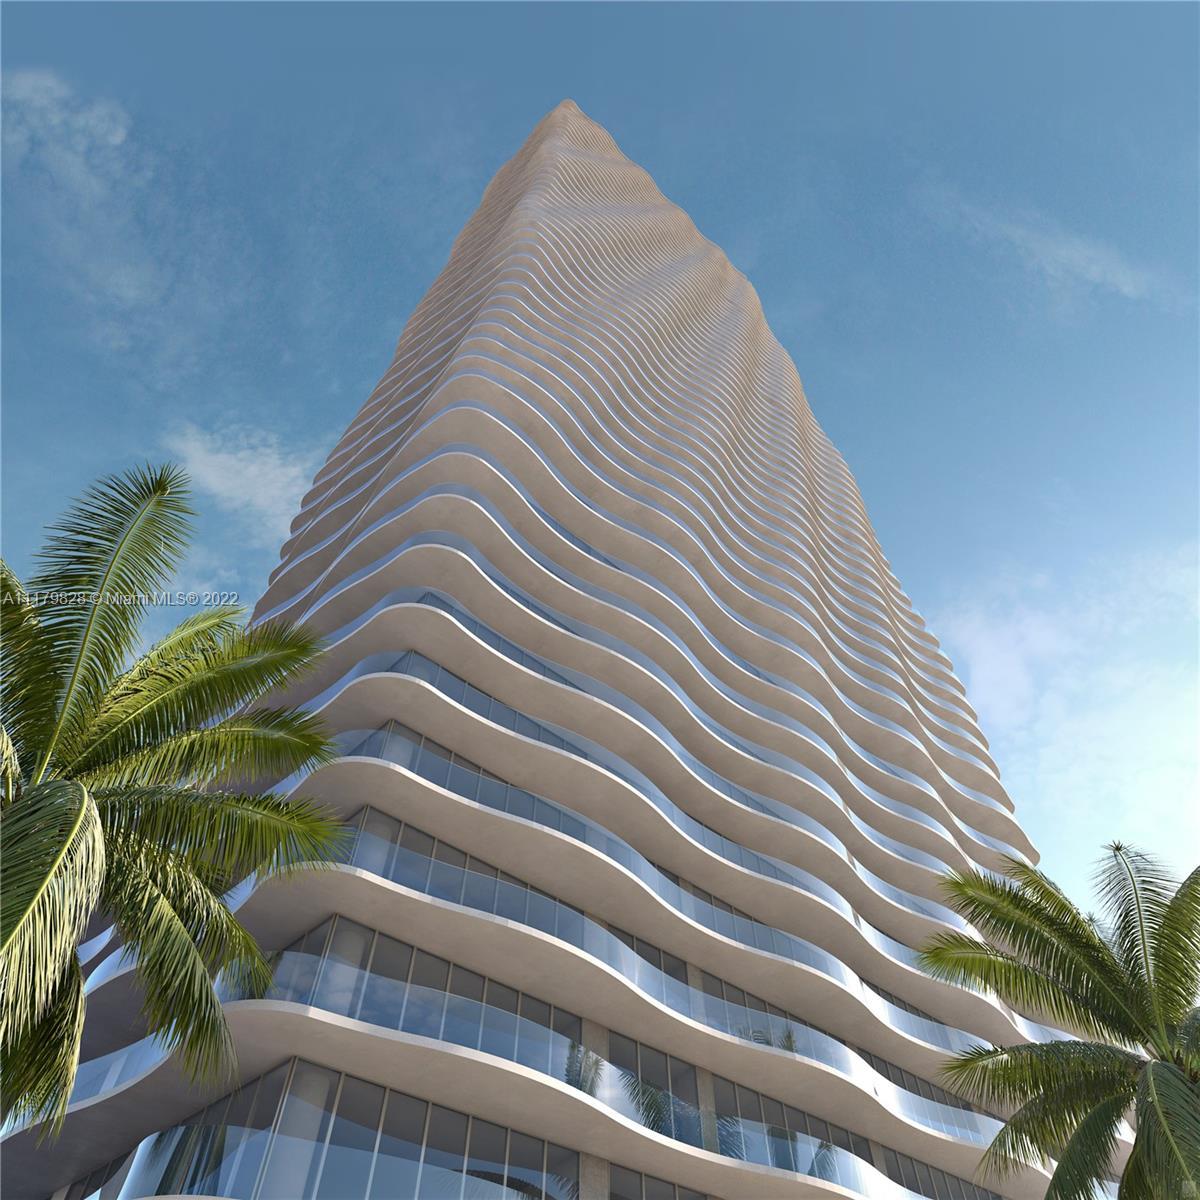 Located in the heart of the arts and cultural district, one of Miami's most prestigious neighborhood